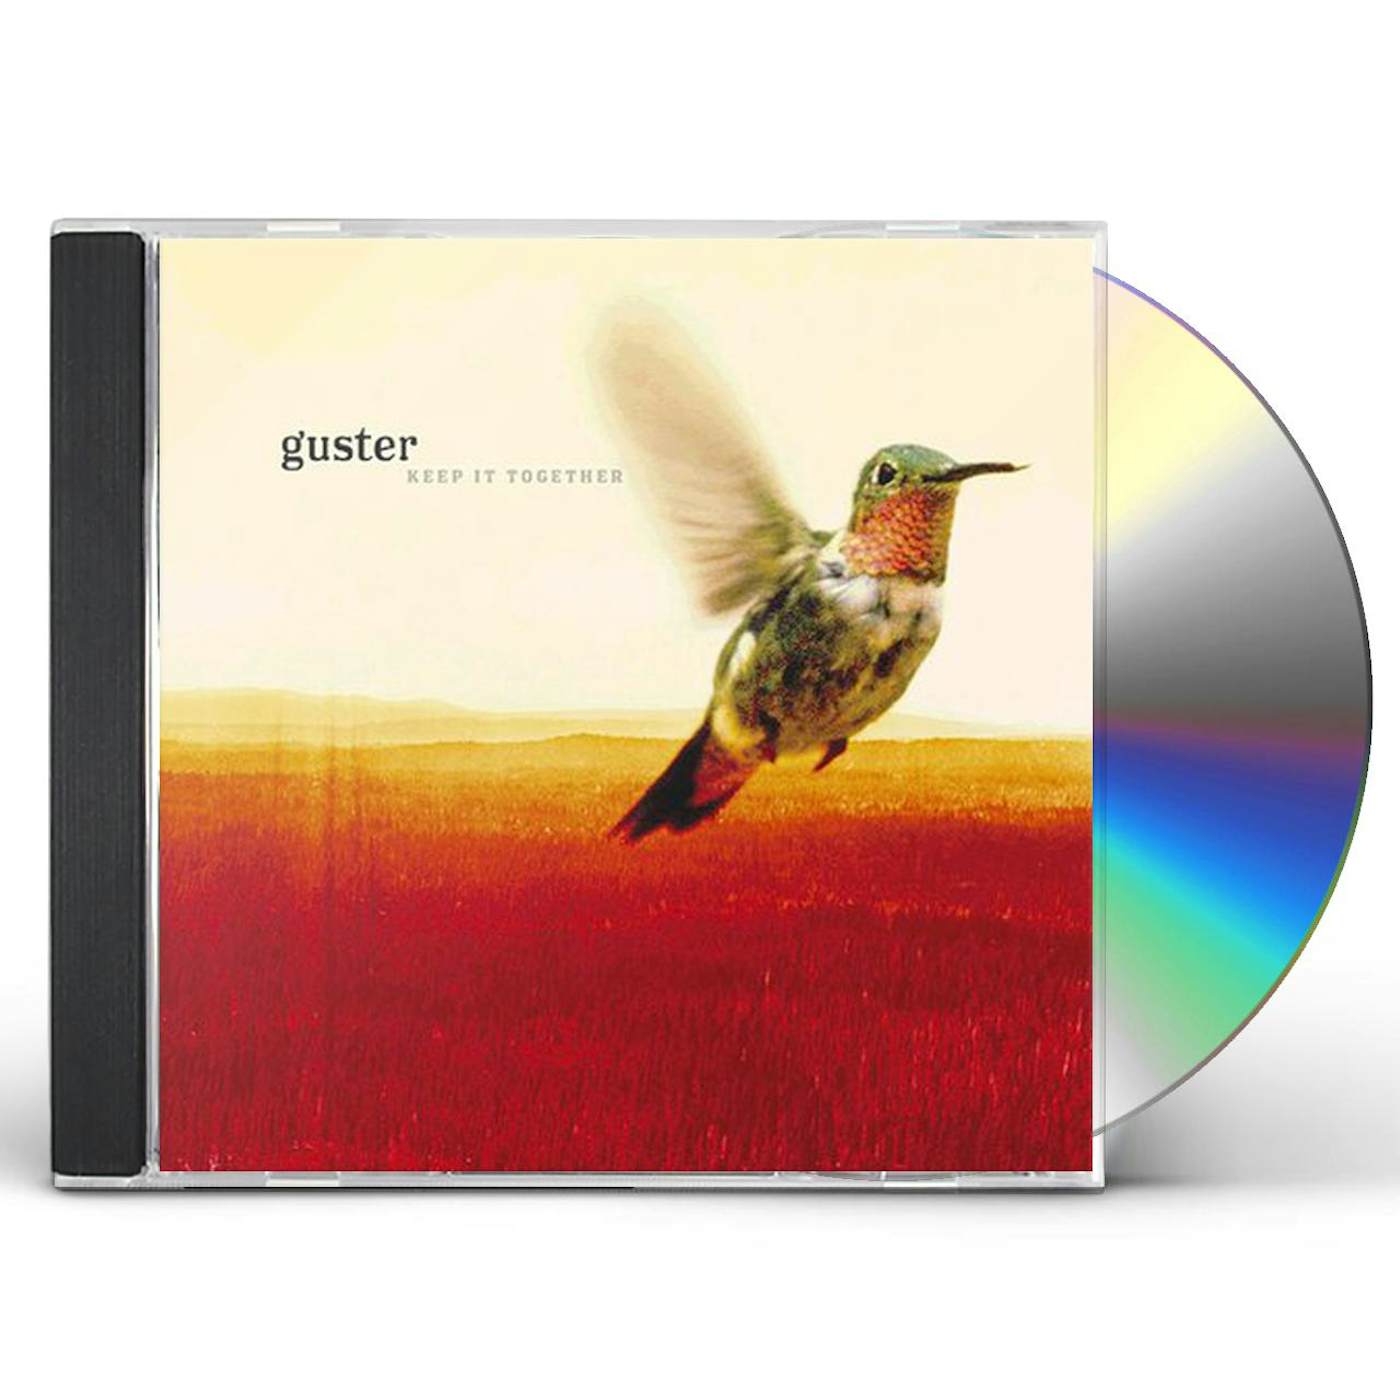 Guster KEEP IT TOGETHER CD